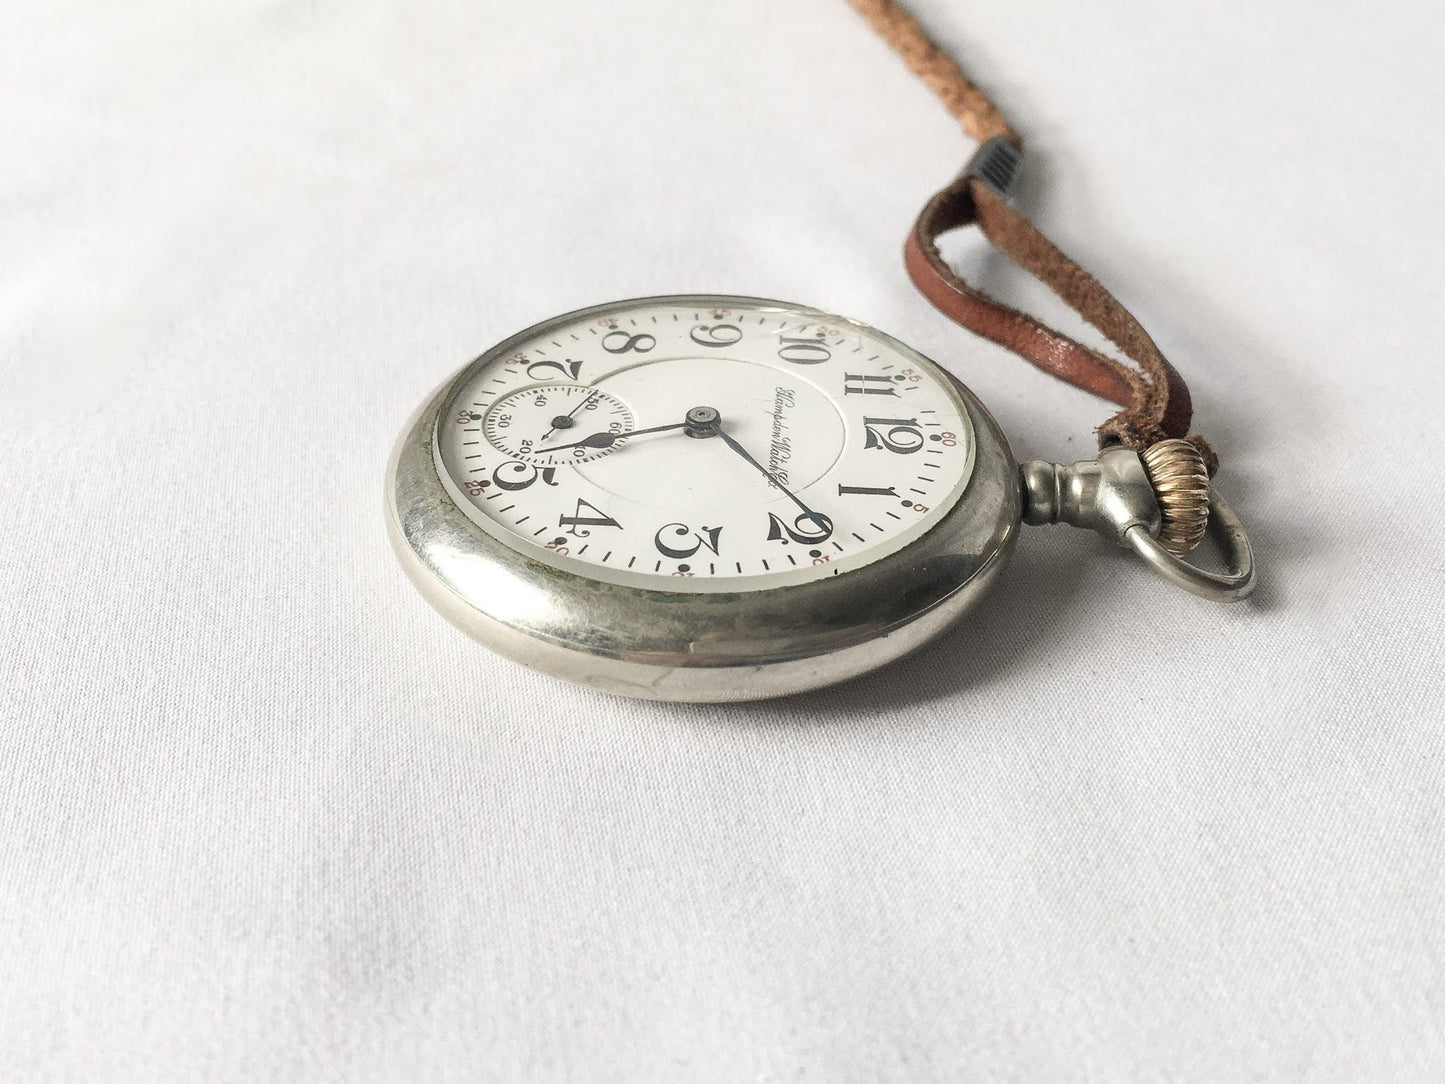 Antique Hampden Watch Co Pocket Watch, Cracked Glass Face, Not Working, Braided Leather "Chain"